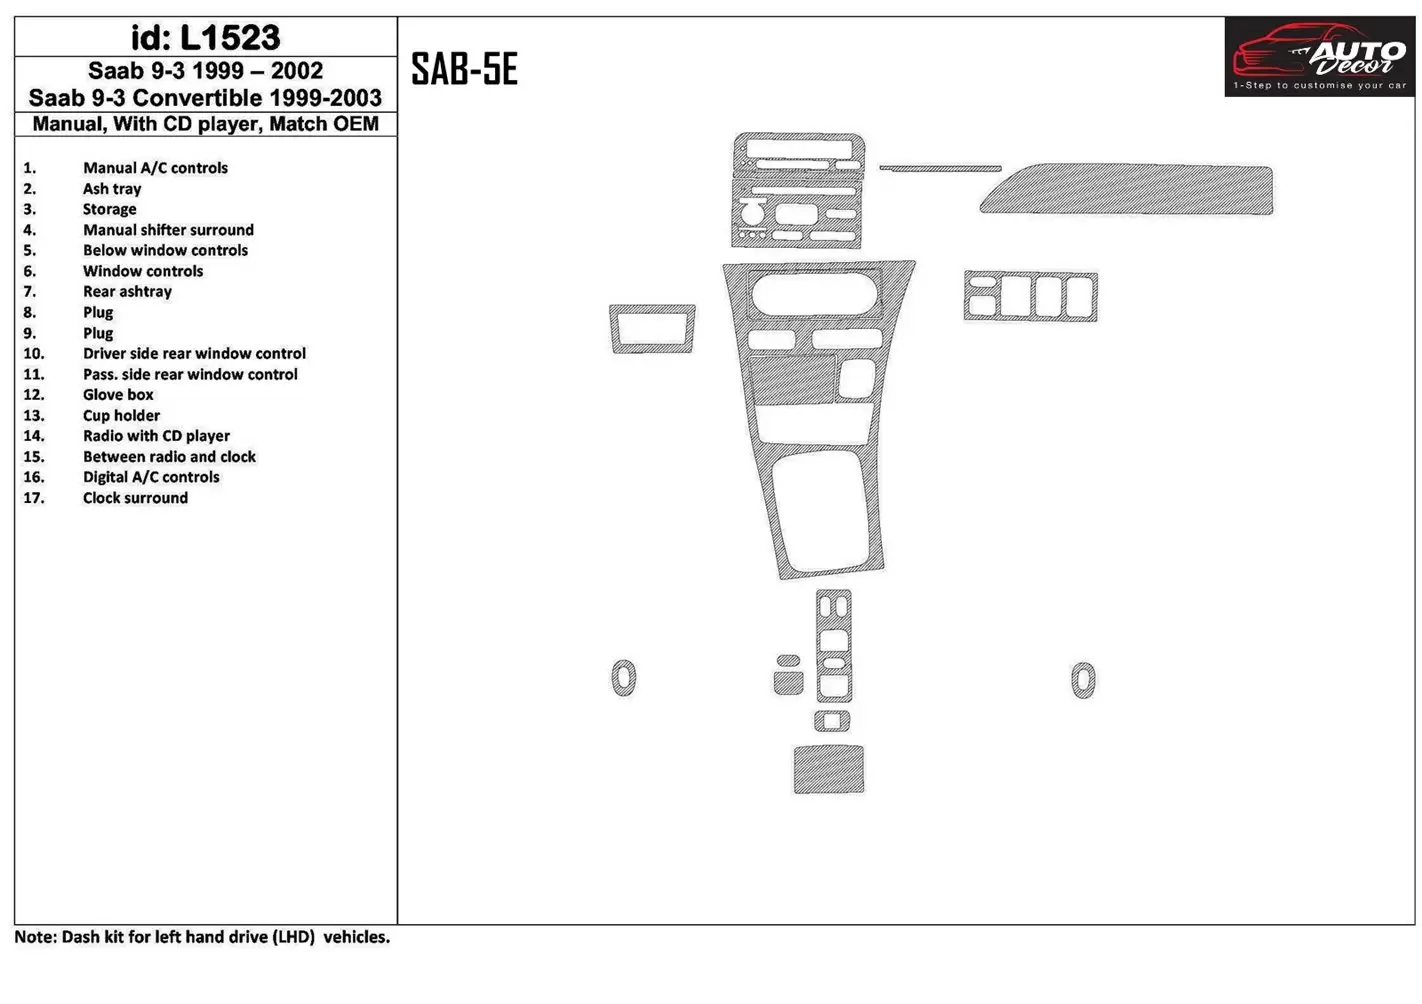 Saab 9-3 1999-2002 Automatic Gearbox, With CD Player, OEM Compliance, 18 Parts set Interior BD Dash Trim Kit